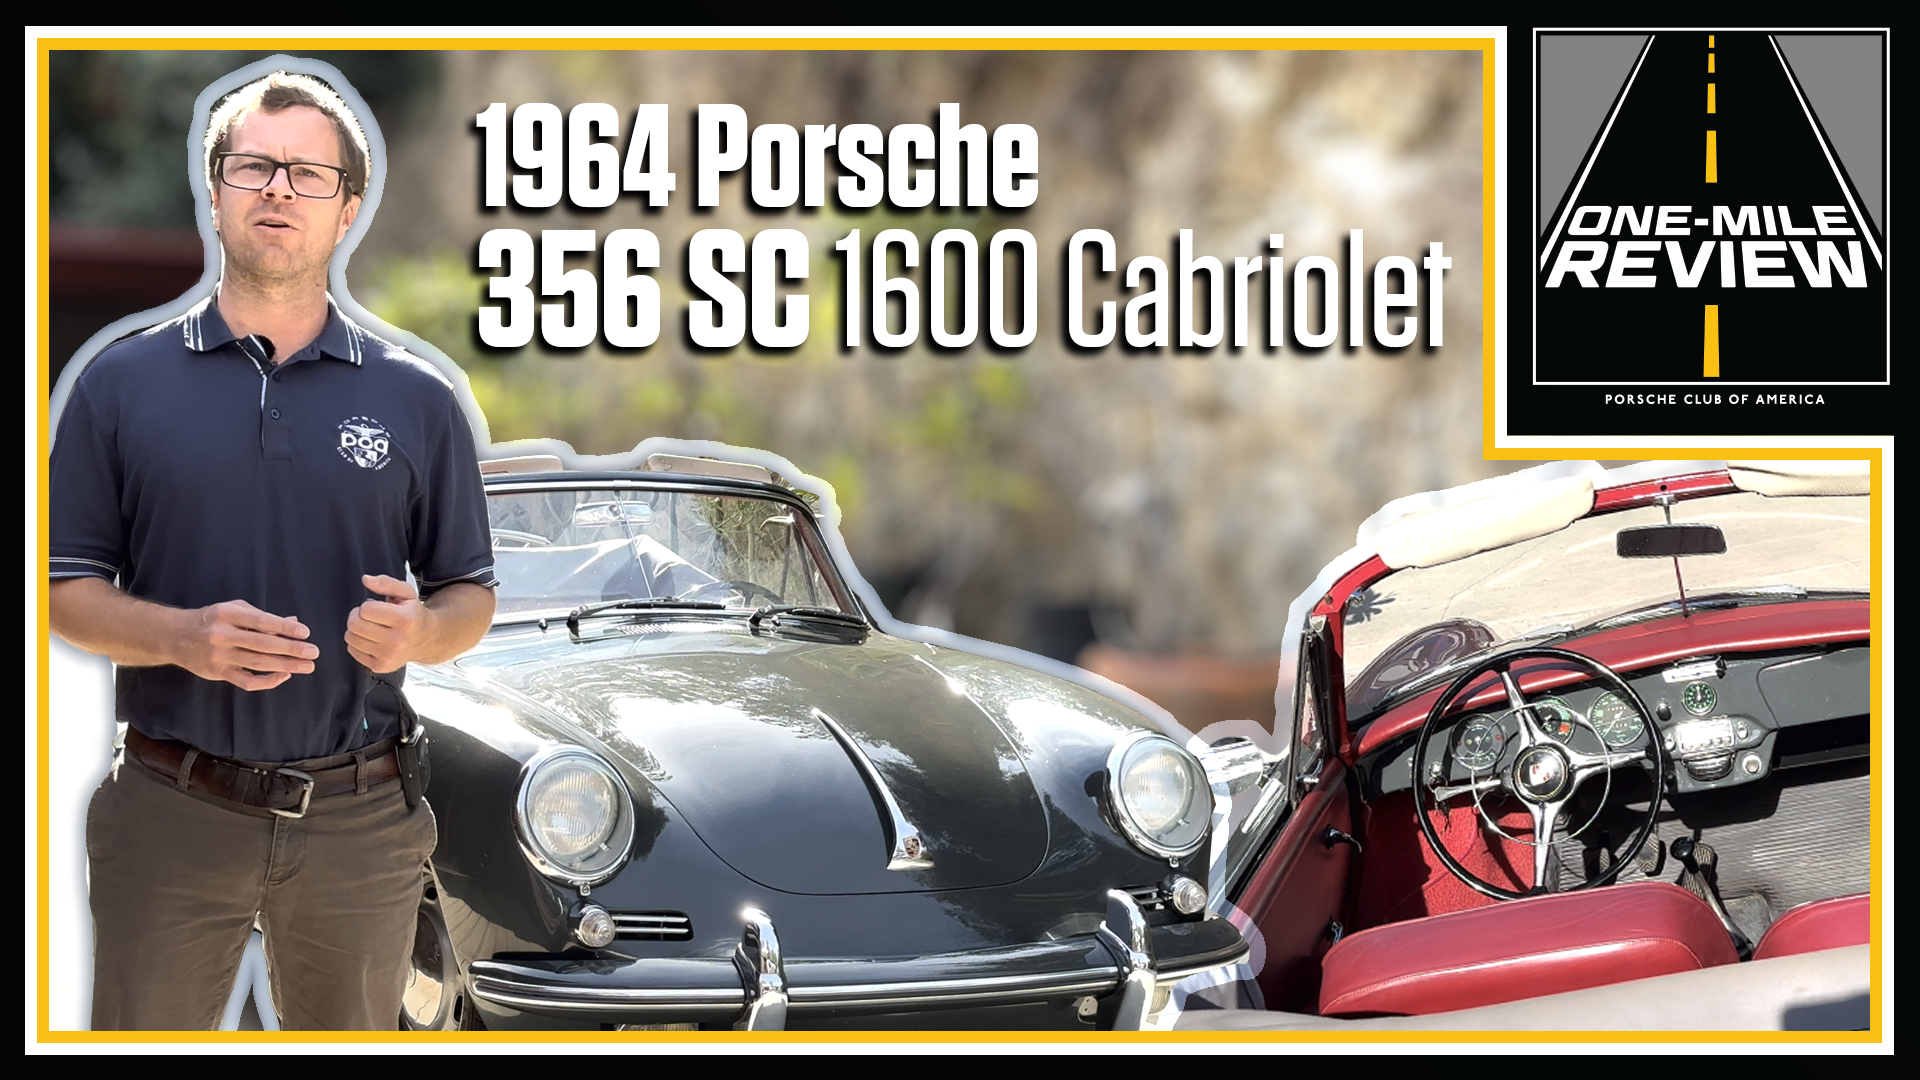 photo of 1964 Porsche 356 SC 1600 Cabriolet: Comfortable & easy to drive! | One-Mile Review image